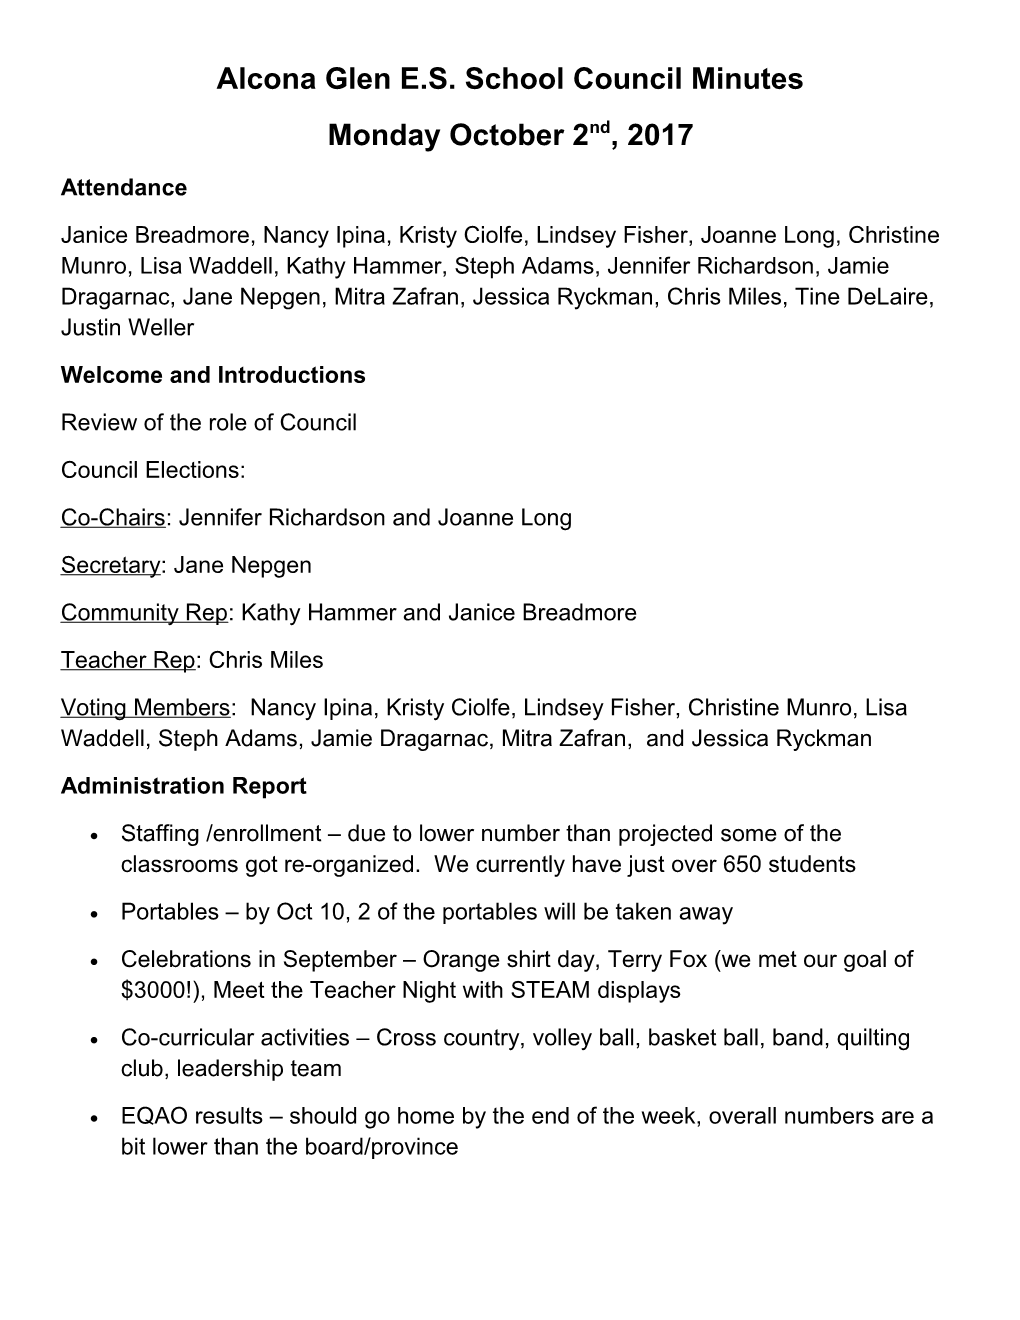 School Council Minutes - Oct. 2Nd, 2017